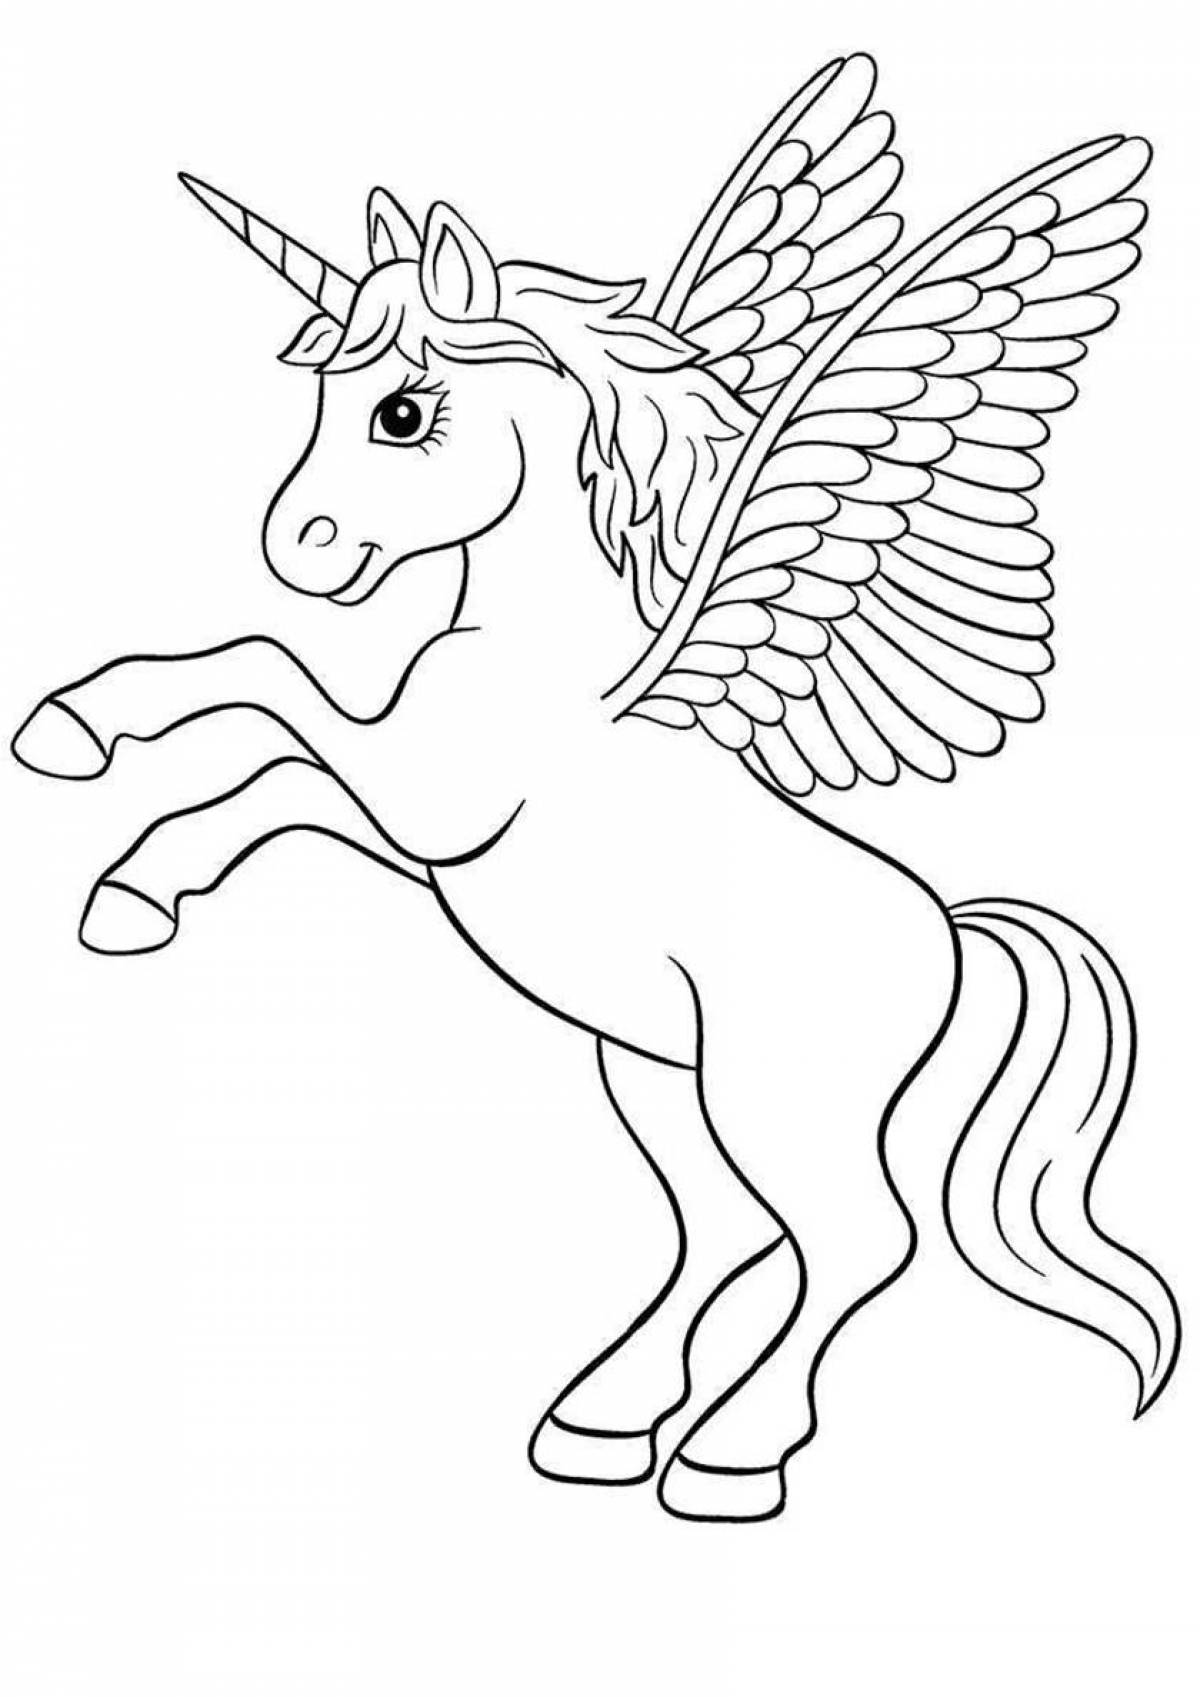 Unicorn with wings #7